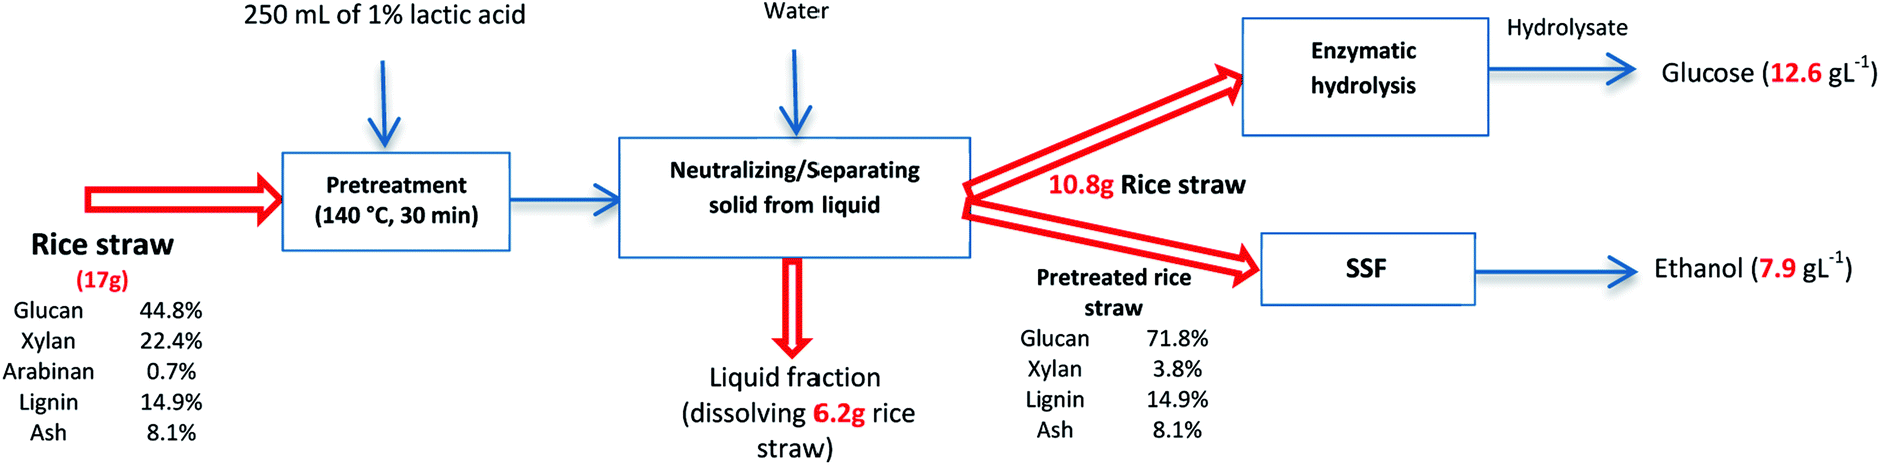 Efficient hydrolysis and ethanol production from rice straw by ...